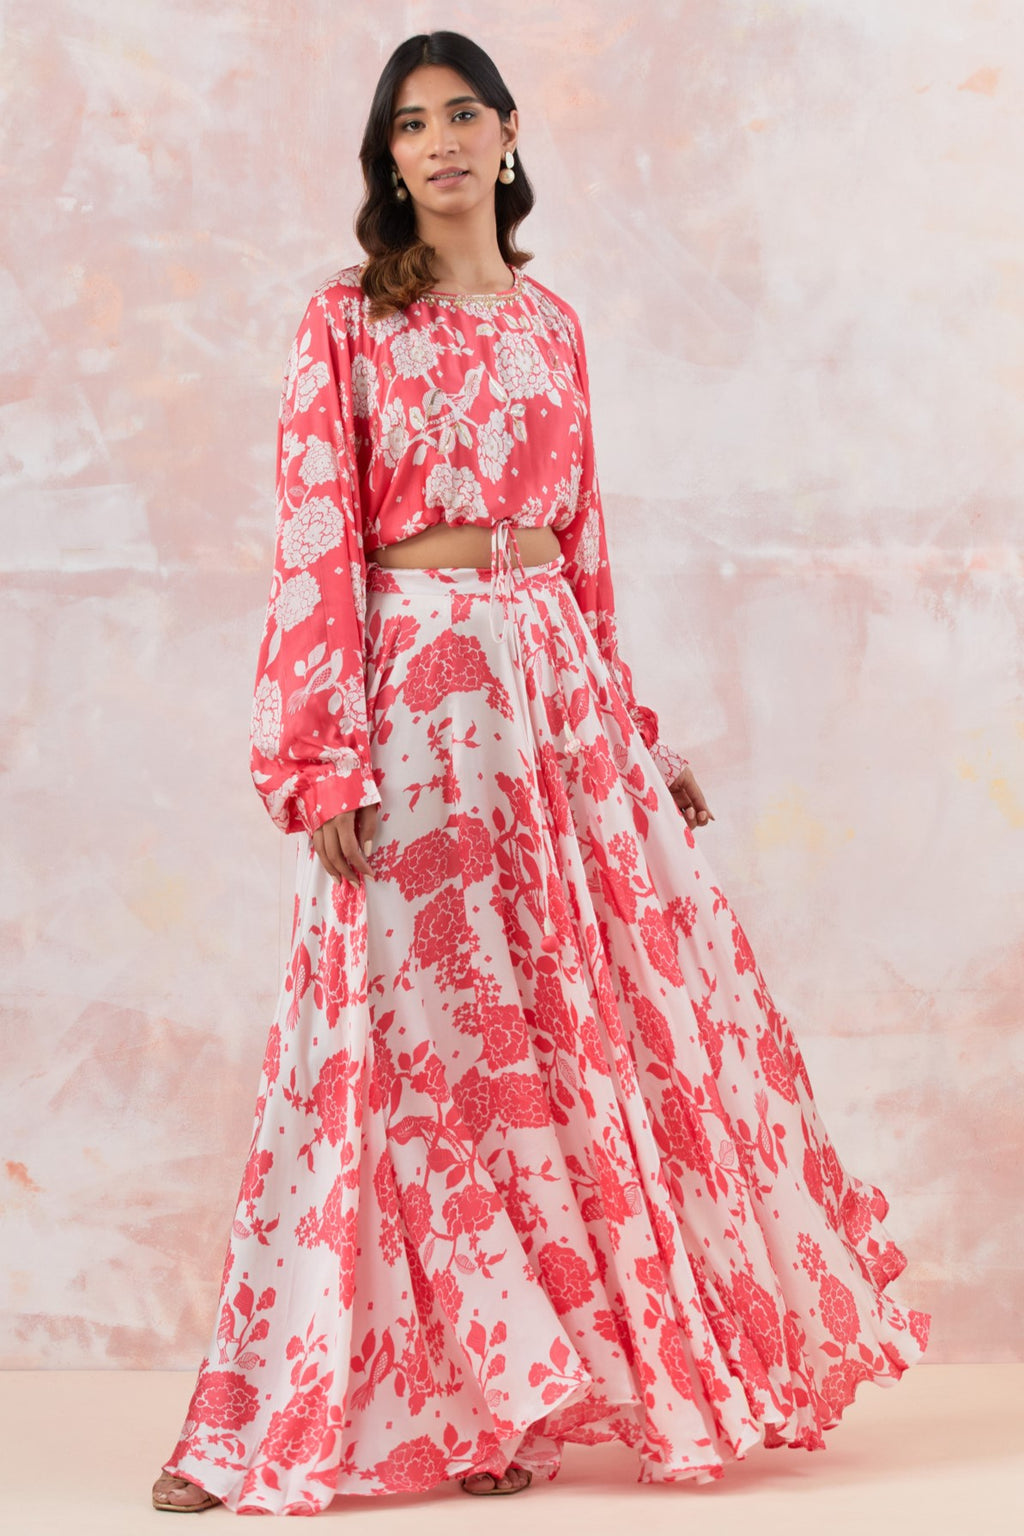 Buy a pink stylish floral skirt set features stunning floral motifs and cheenta handwork. Dazzle on weddings and special occasions with exquisite Indian designer dresses, sharara suits, Anarkali suits, and wedding lehengas from Pure Elegance Indian fashion store in the USA.